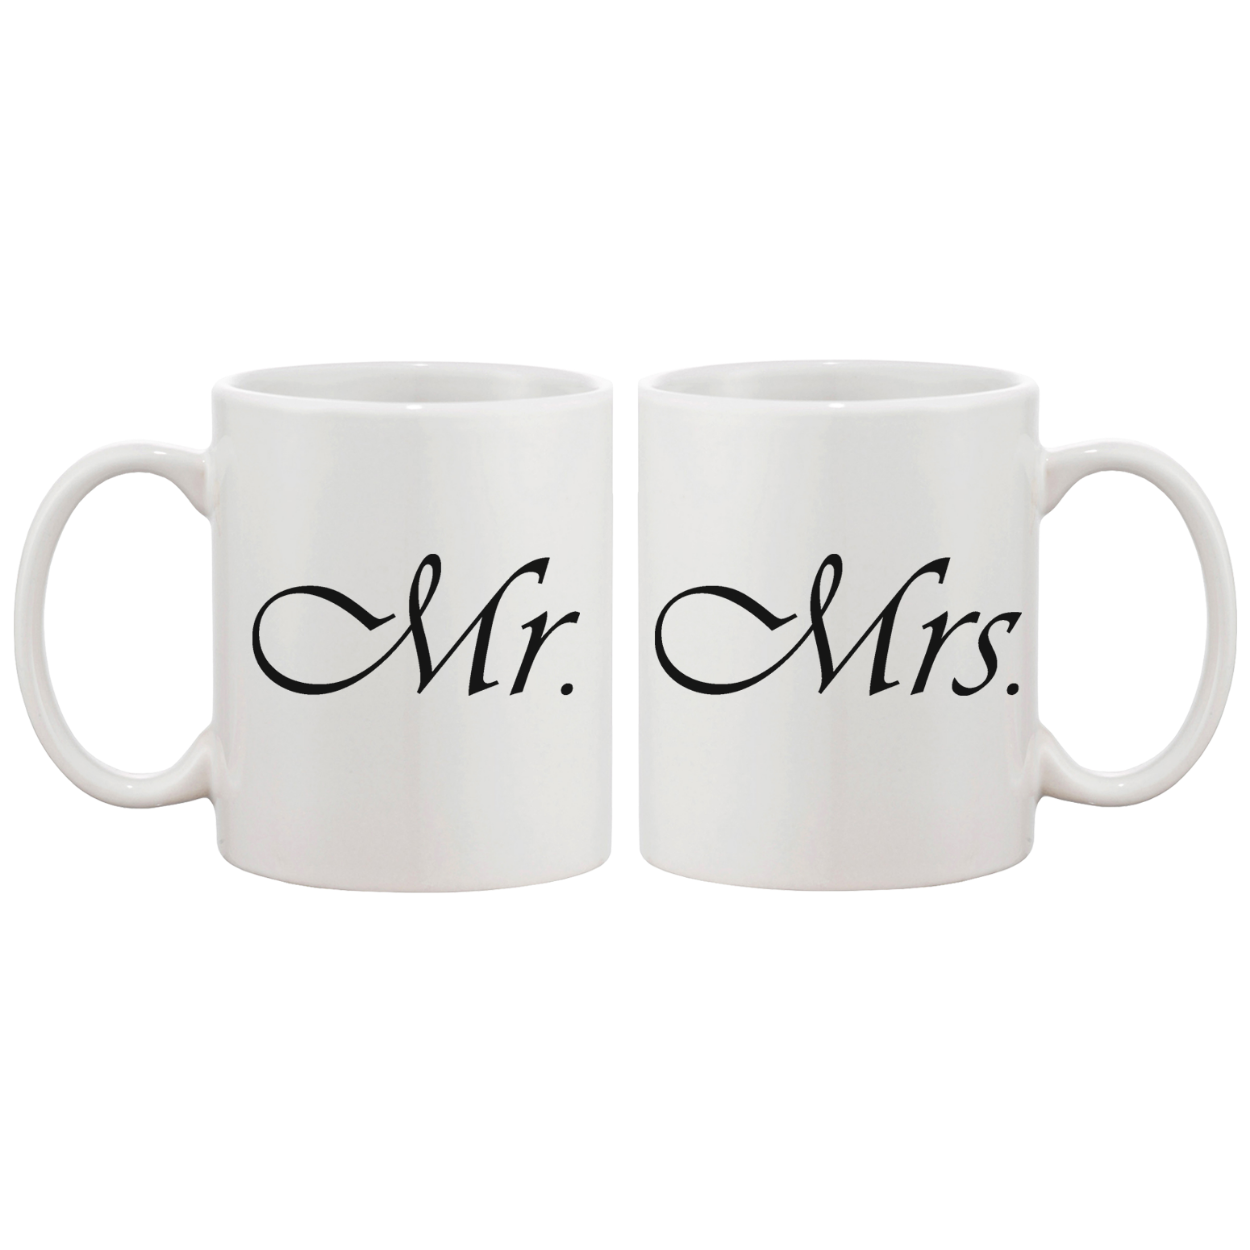 Cute Mr and Mrs Couple Mugs - His and Hers Matching Coffee Mug Cup Set White